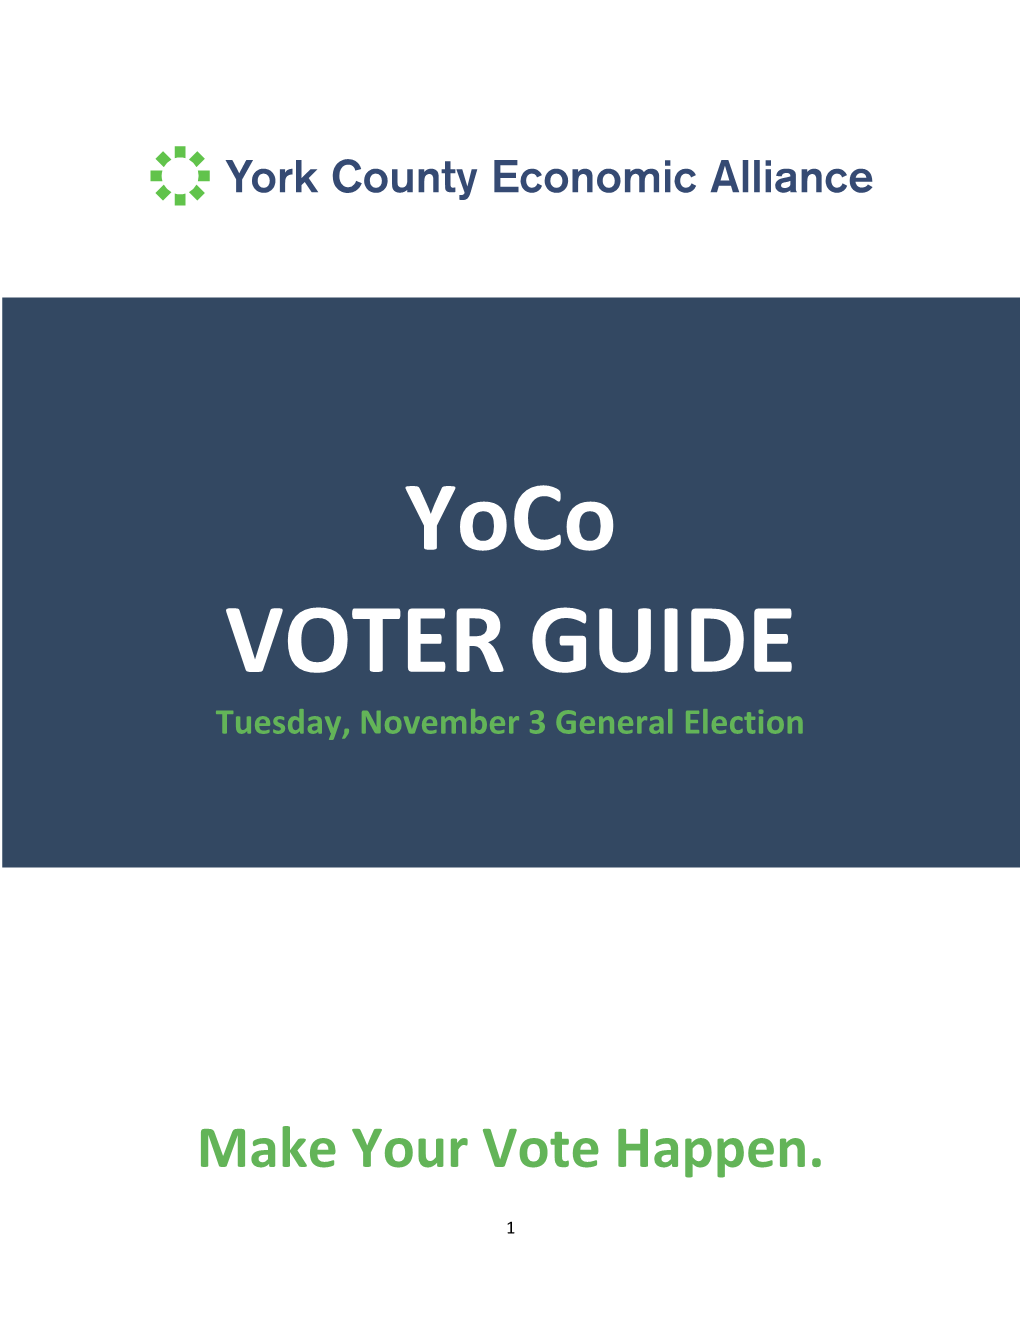 Yoco VOTER GUIDE Tuesday, November 3 General Election